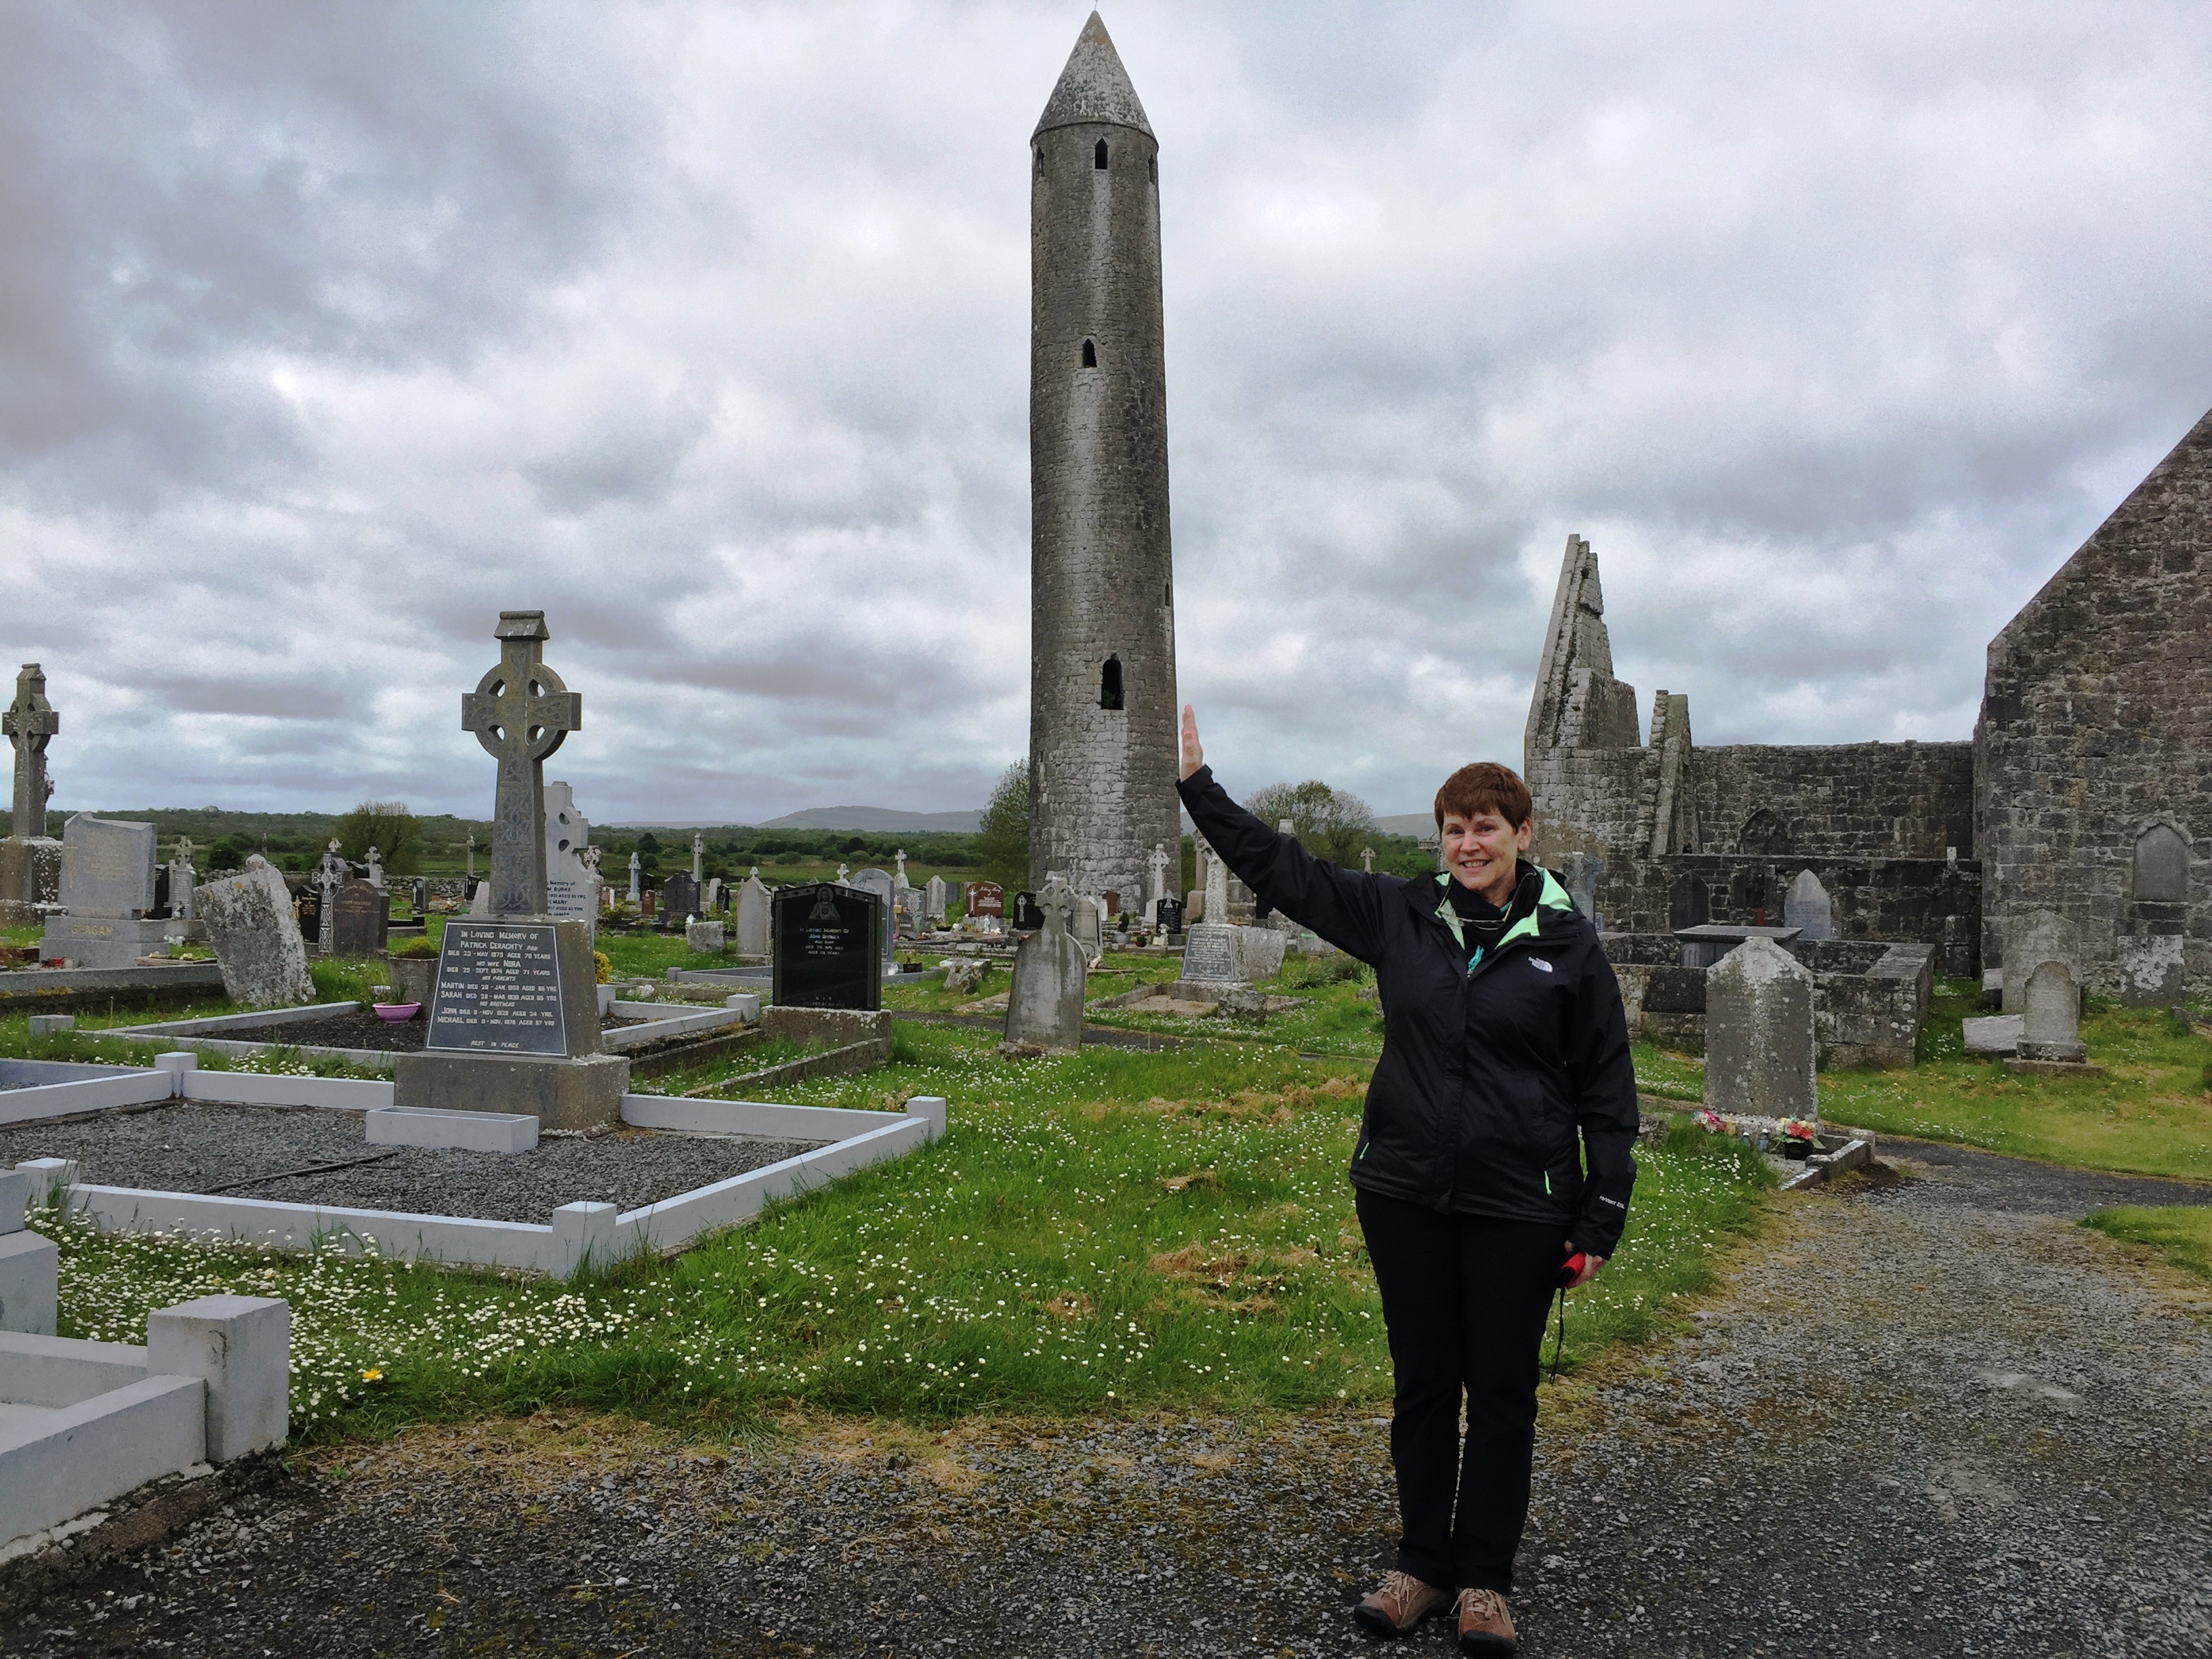 Molly reaches out a hand to steady the round tower at Kilmacduagh. Photo by Martha Clark.